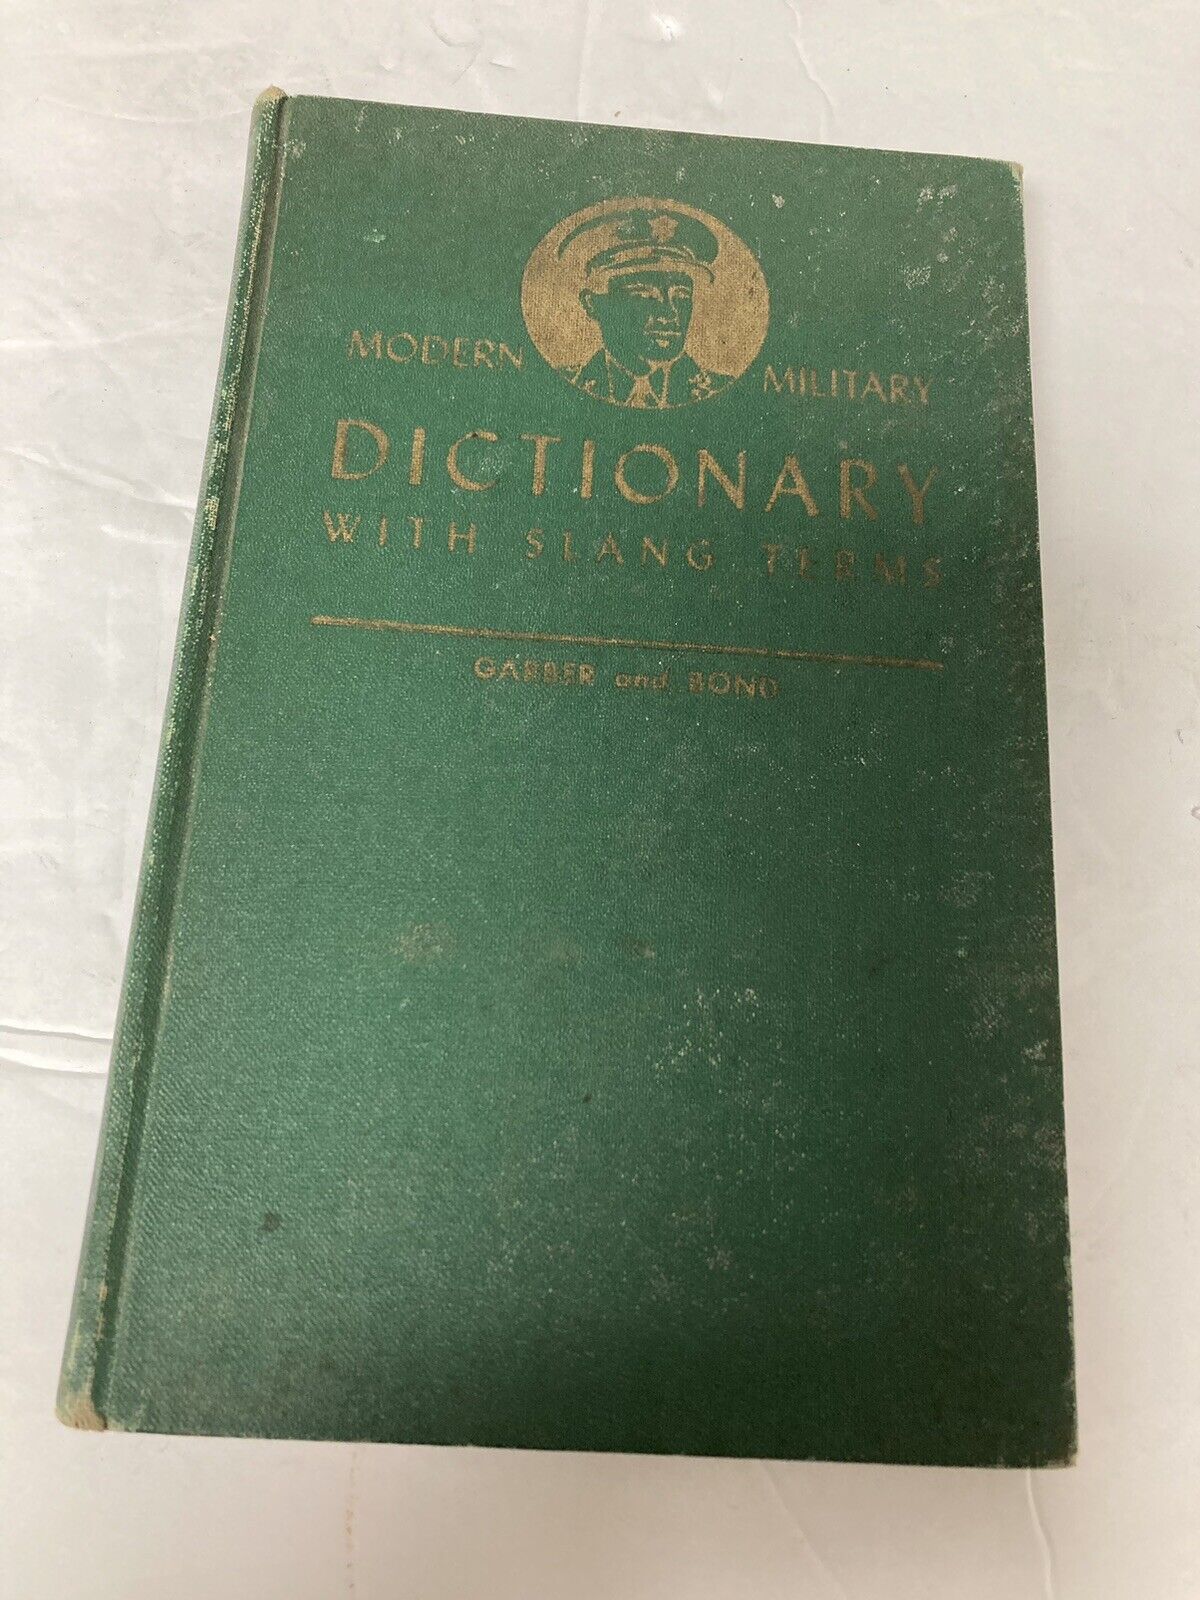 1942 MODERN MILITARY DICTIONARY WITH SLANG TERMS BY MAX GARBER